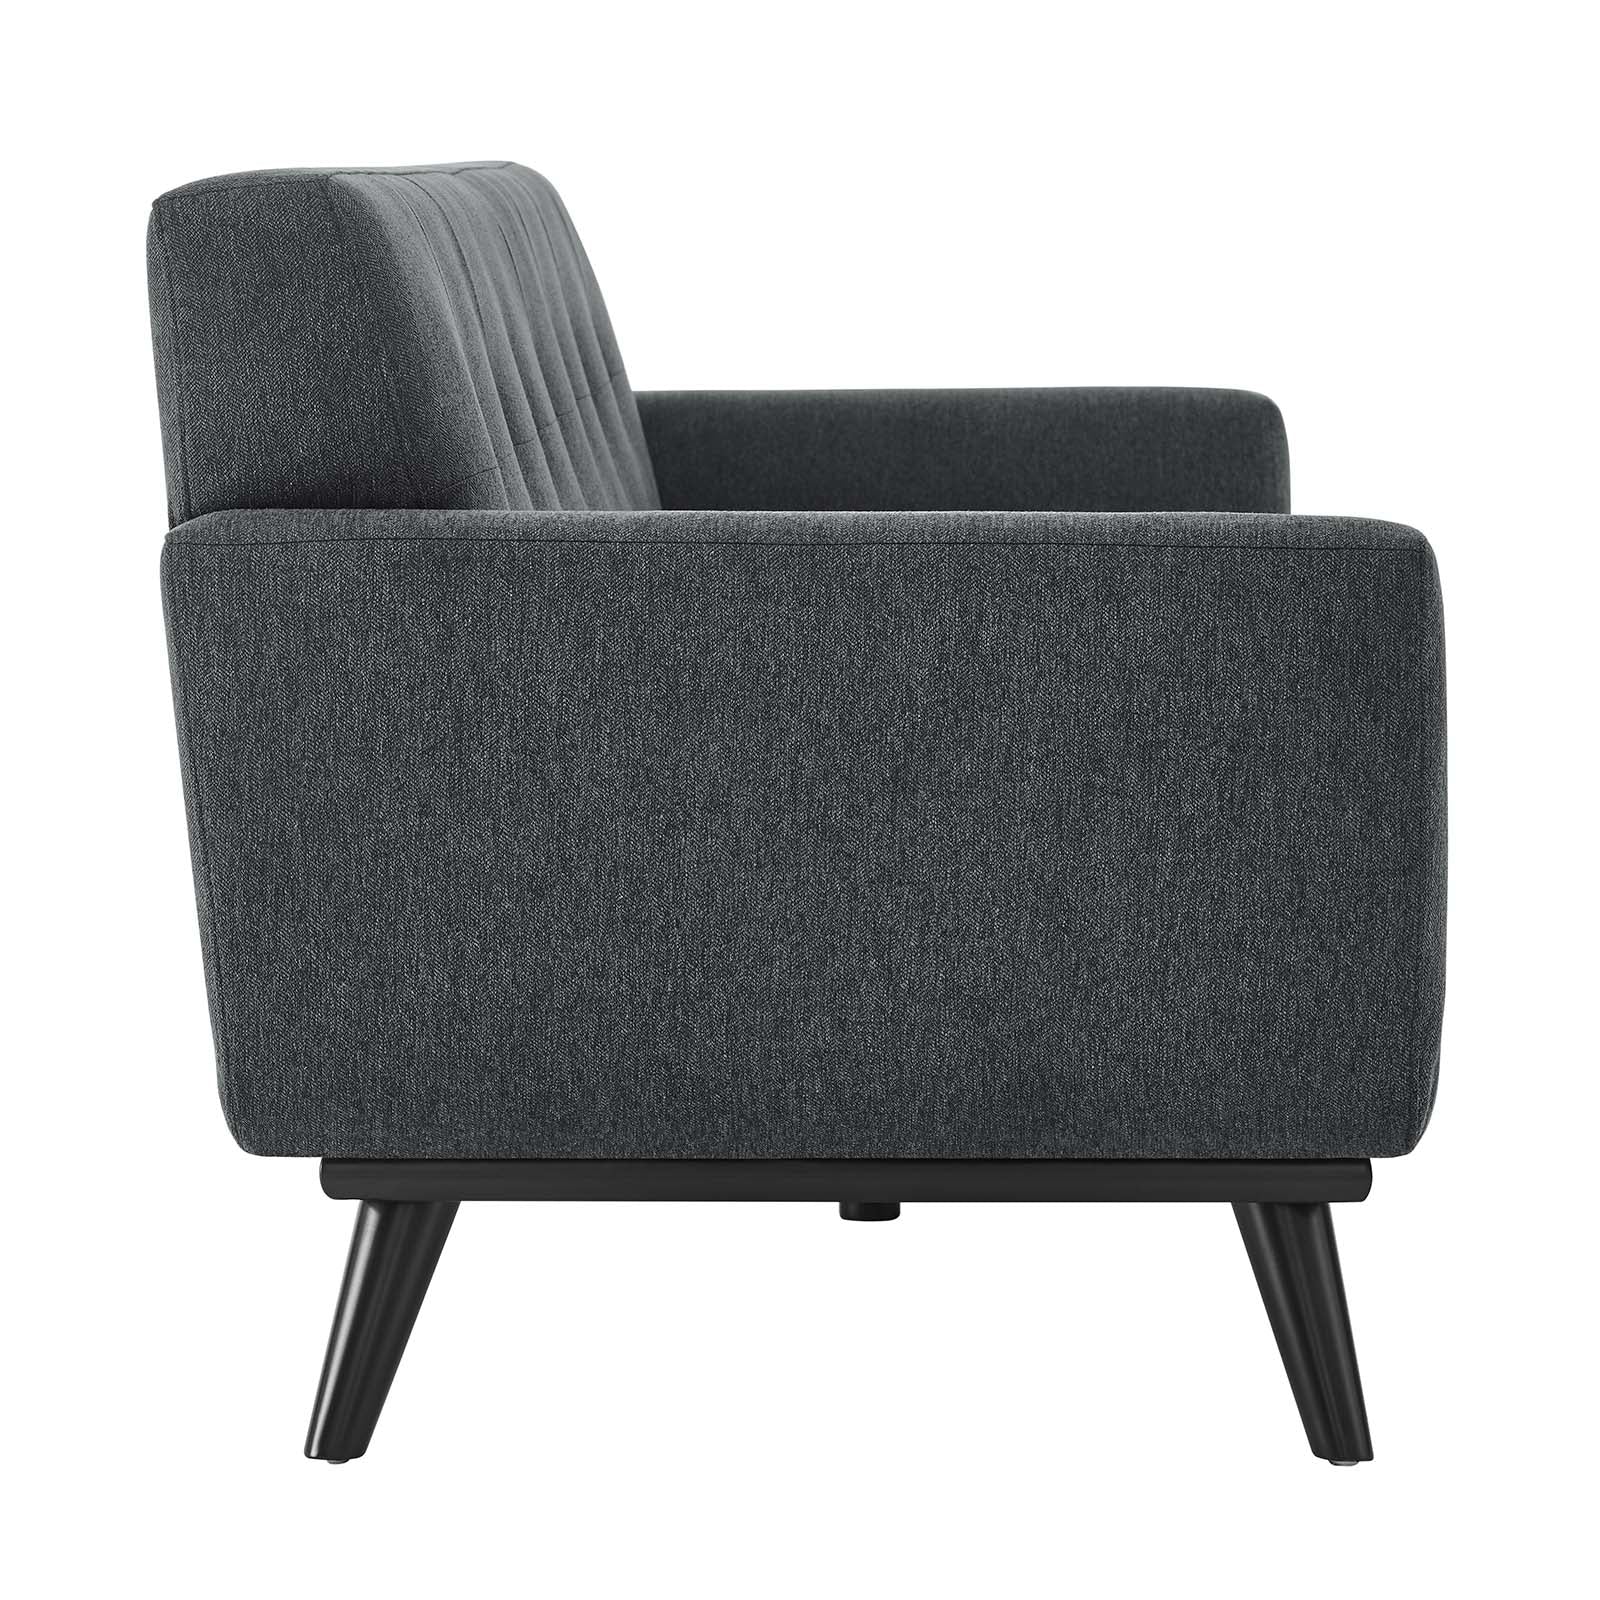 Modway Sofas & Couches - Engage Herringbone Fabric Sofa Charcoal